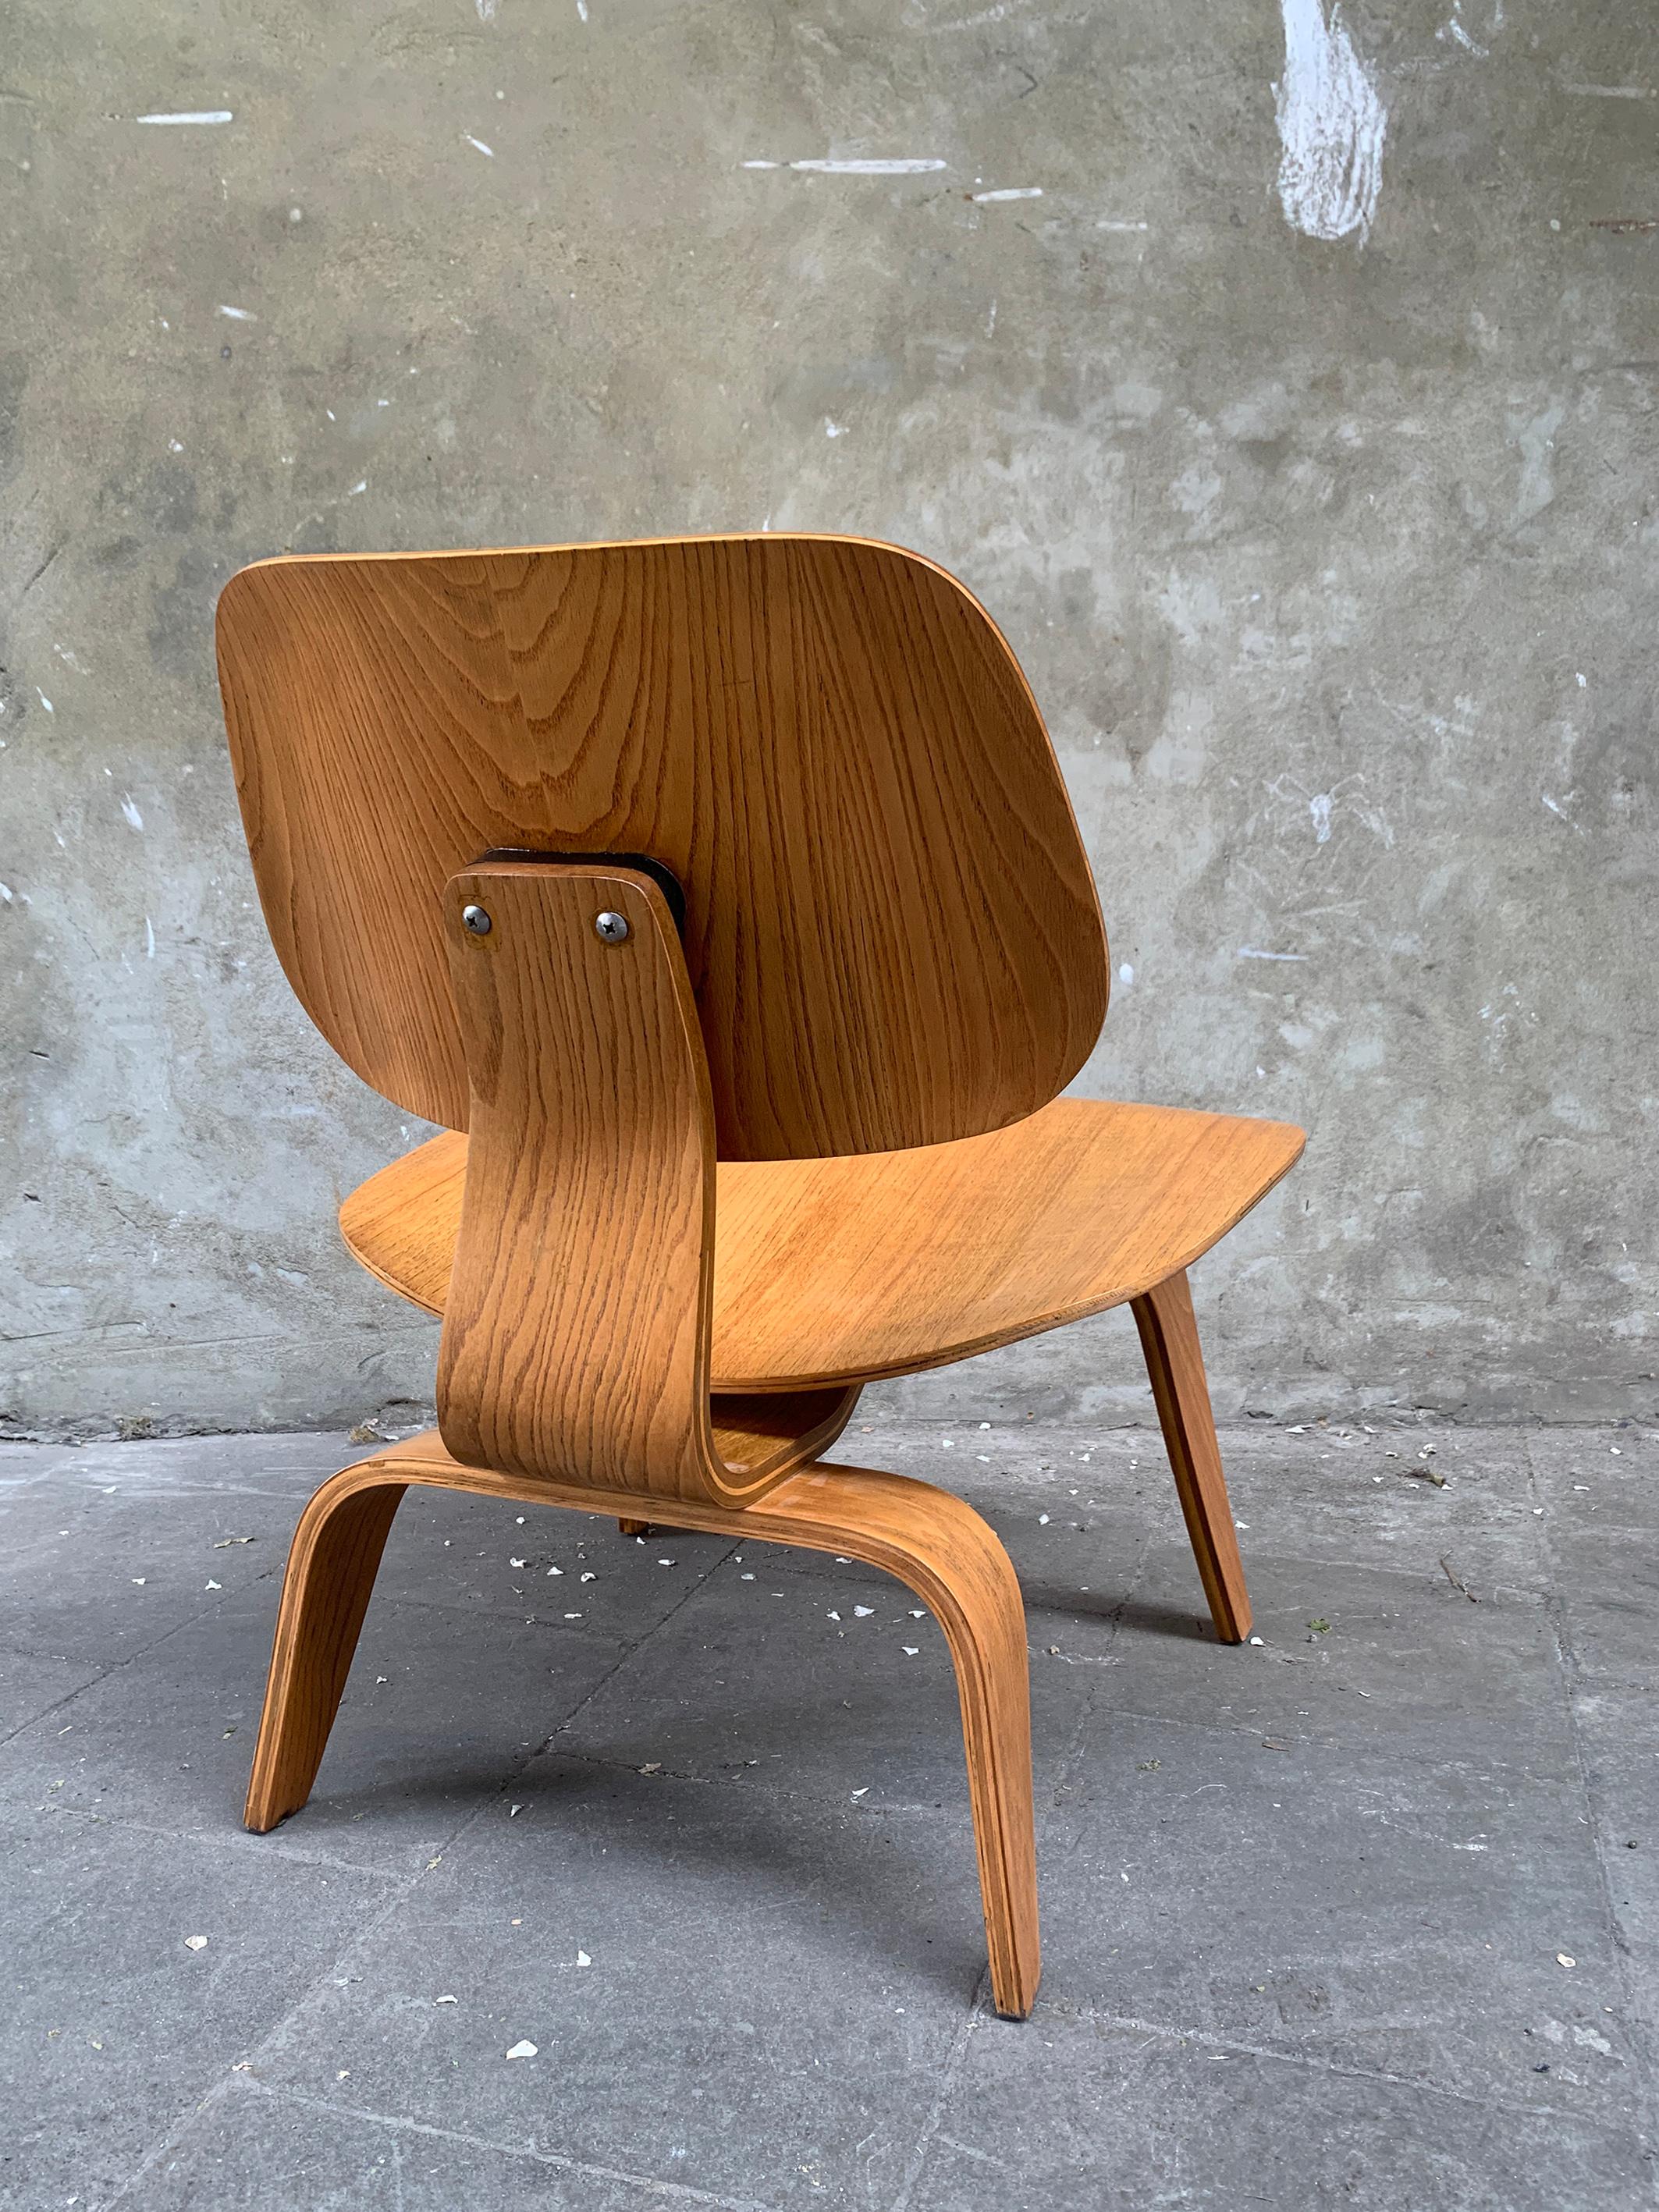 20th Century Early LCW Lounge Chair in Ash by Charles & Ray Eames, Herman Miller, 1950s